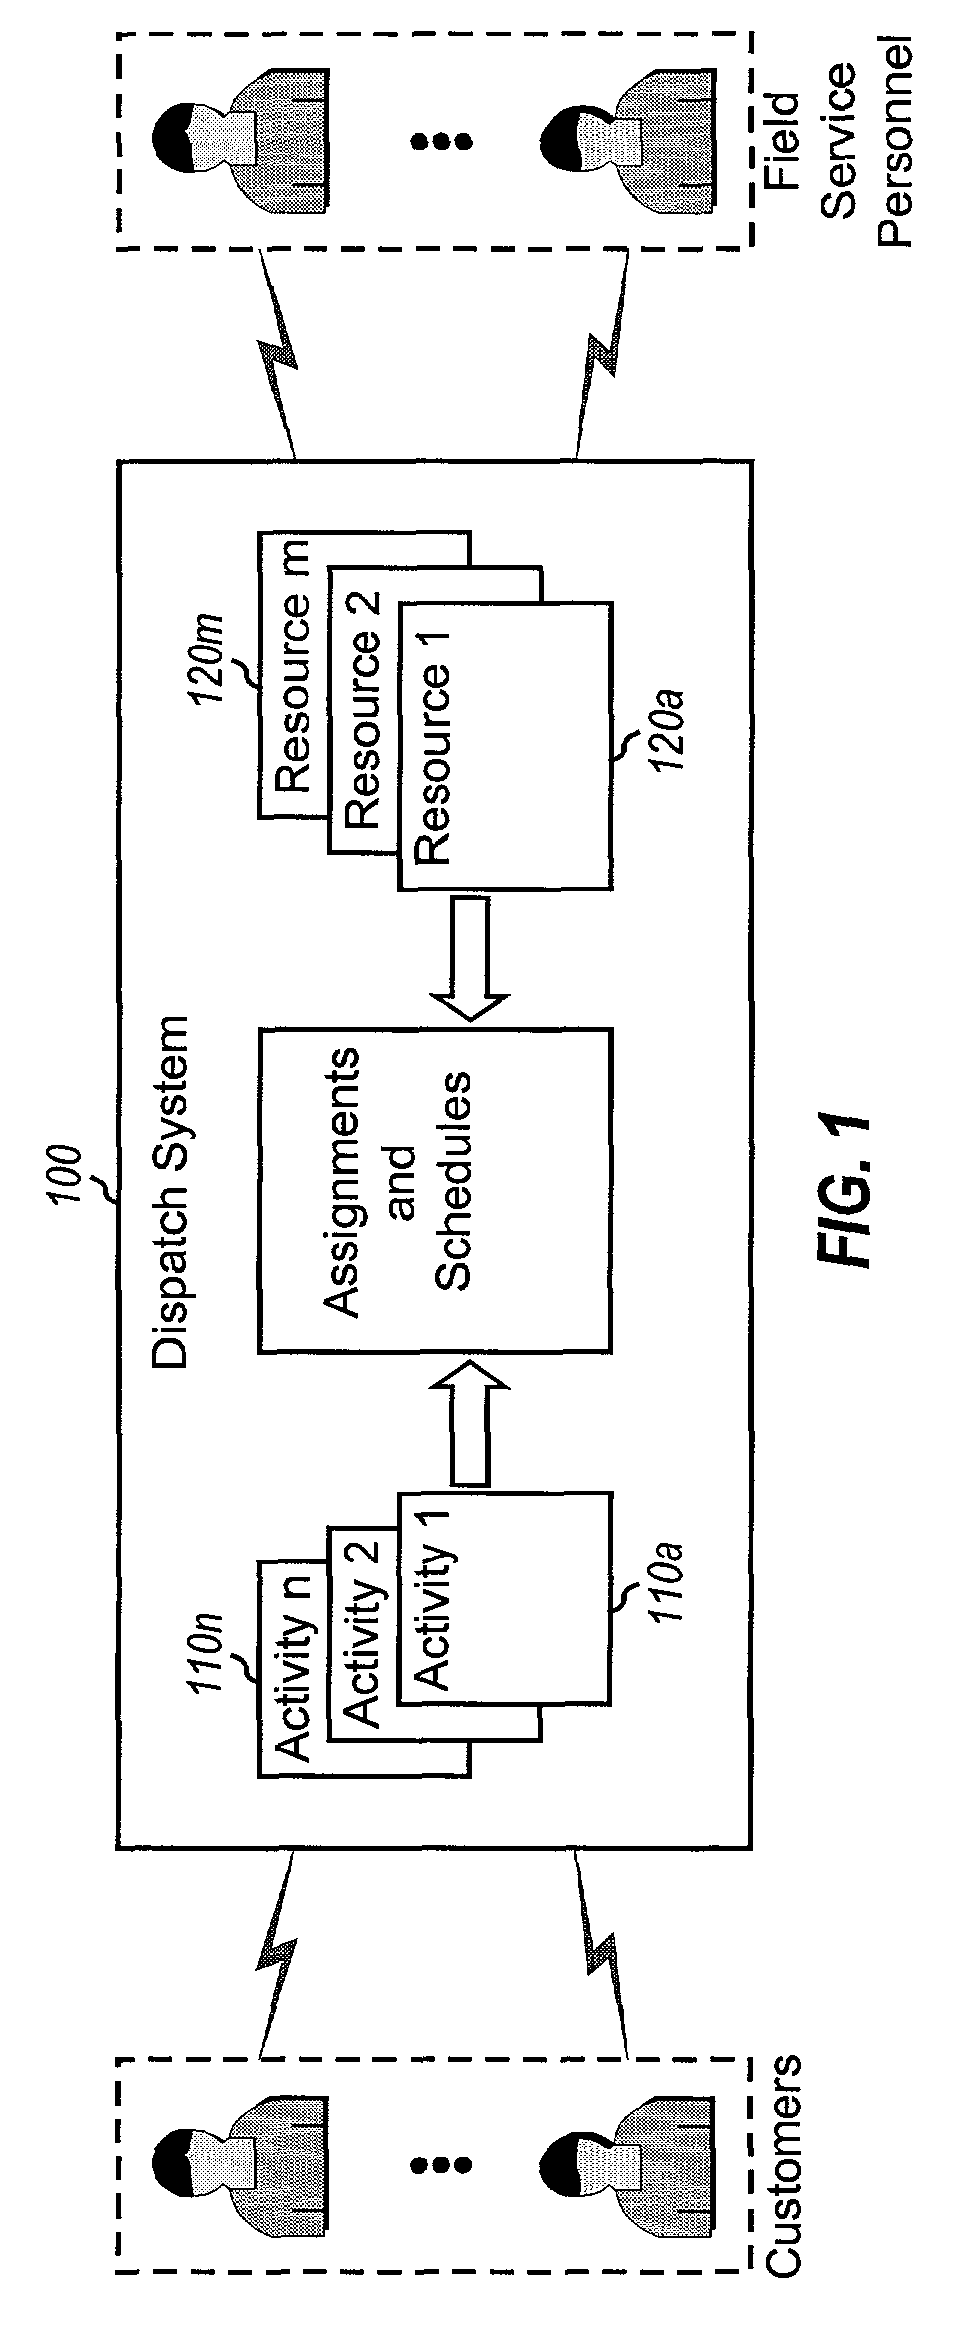 System and method for assigning and scheduling activities